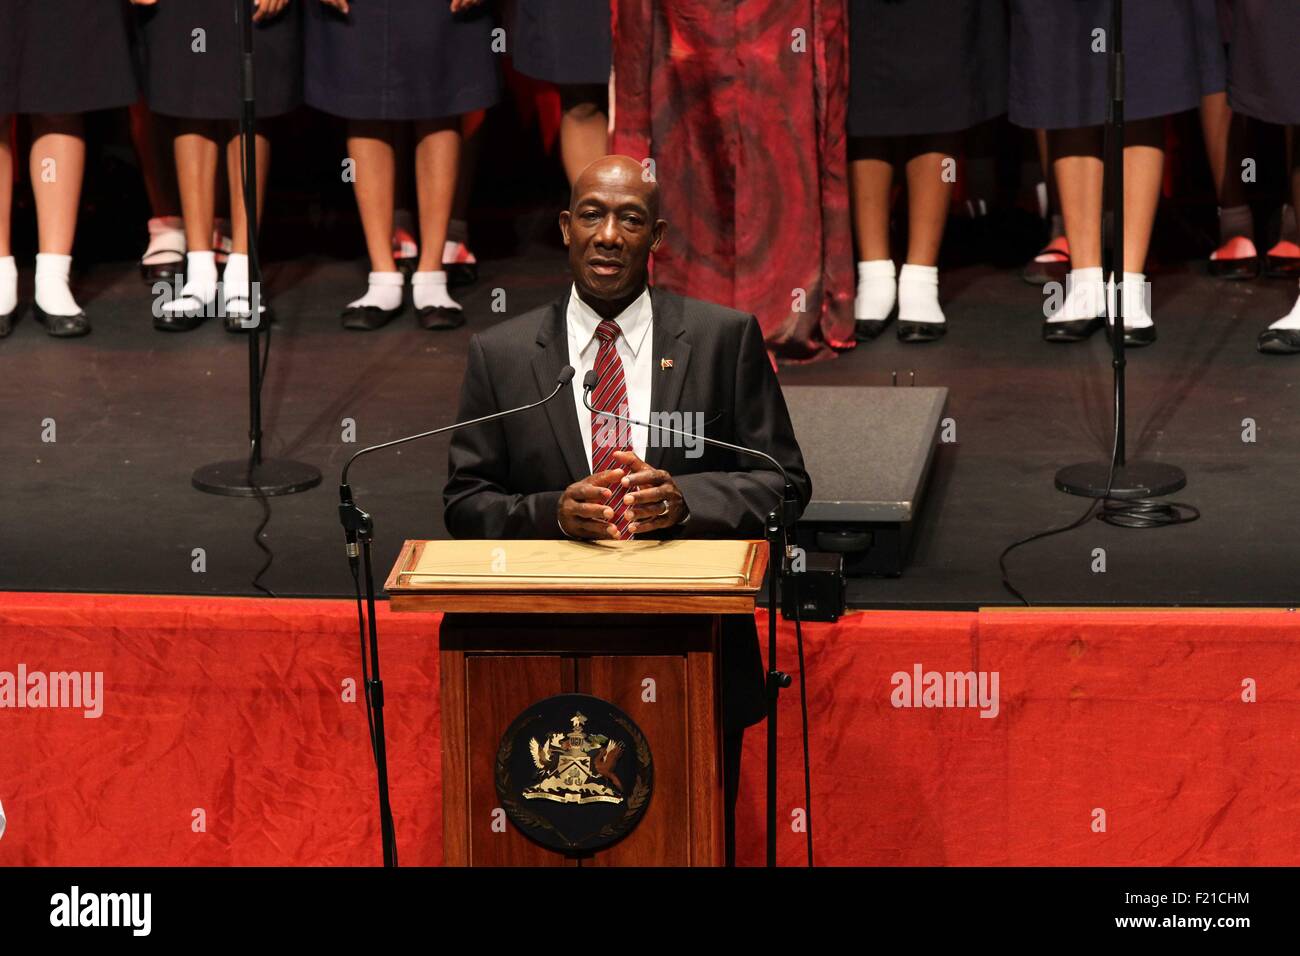 Port Of Spain, Trinidad and Tobago. 9th Sep, 2015. Trinidad and Tobago's People's National Movement (PNM) leader Keith Rowley, delivers a speech during his swearing-in ceremony as the country's new prime minister in Port of Spain, capital of Trinidad and Tobago, on Sept. 9, 2015. Trinidad and Tobago's People's National Movement (PNM) leader Keith Rowley was sworn in Wednesday as the country's new prime minister by President Anthony Carmona in a ceremony held here. © Gao Xing/Xinhua/Alamy Live News Stock Photo